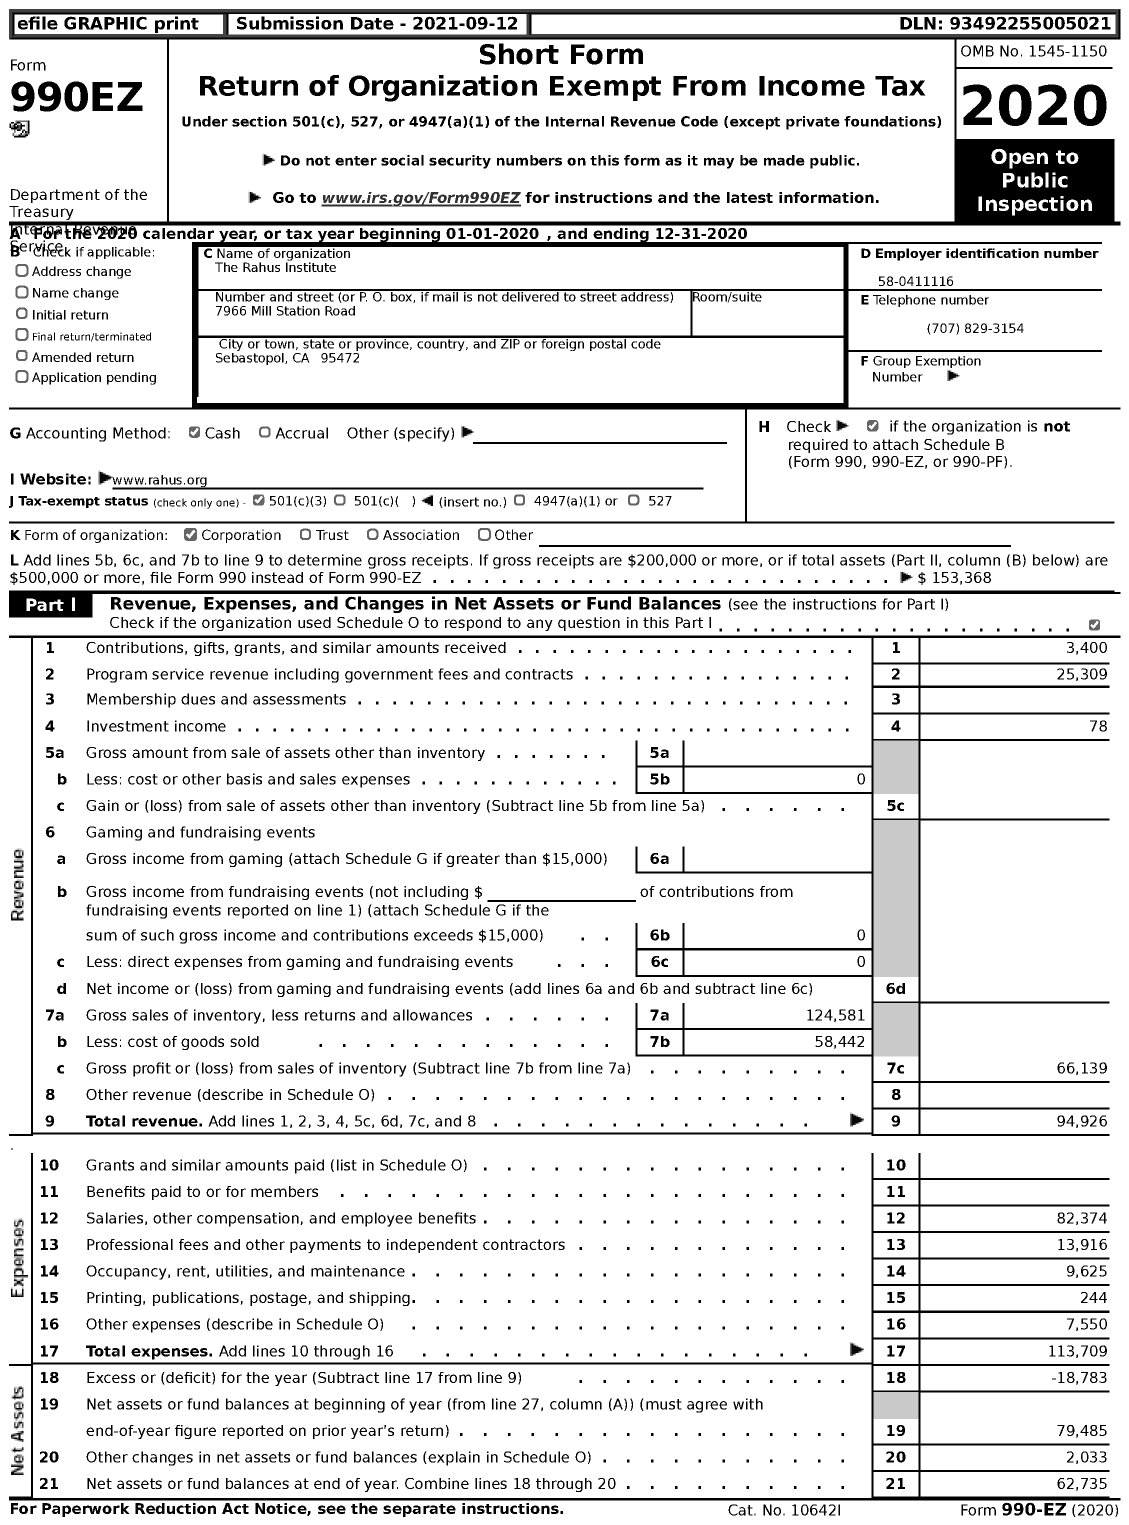 Image of first page of 2020 Form 990EZ for The Rahus Institute